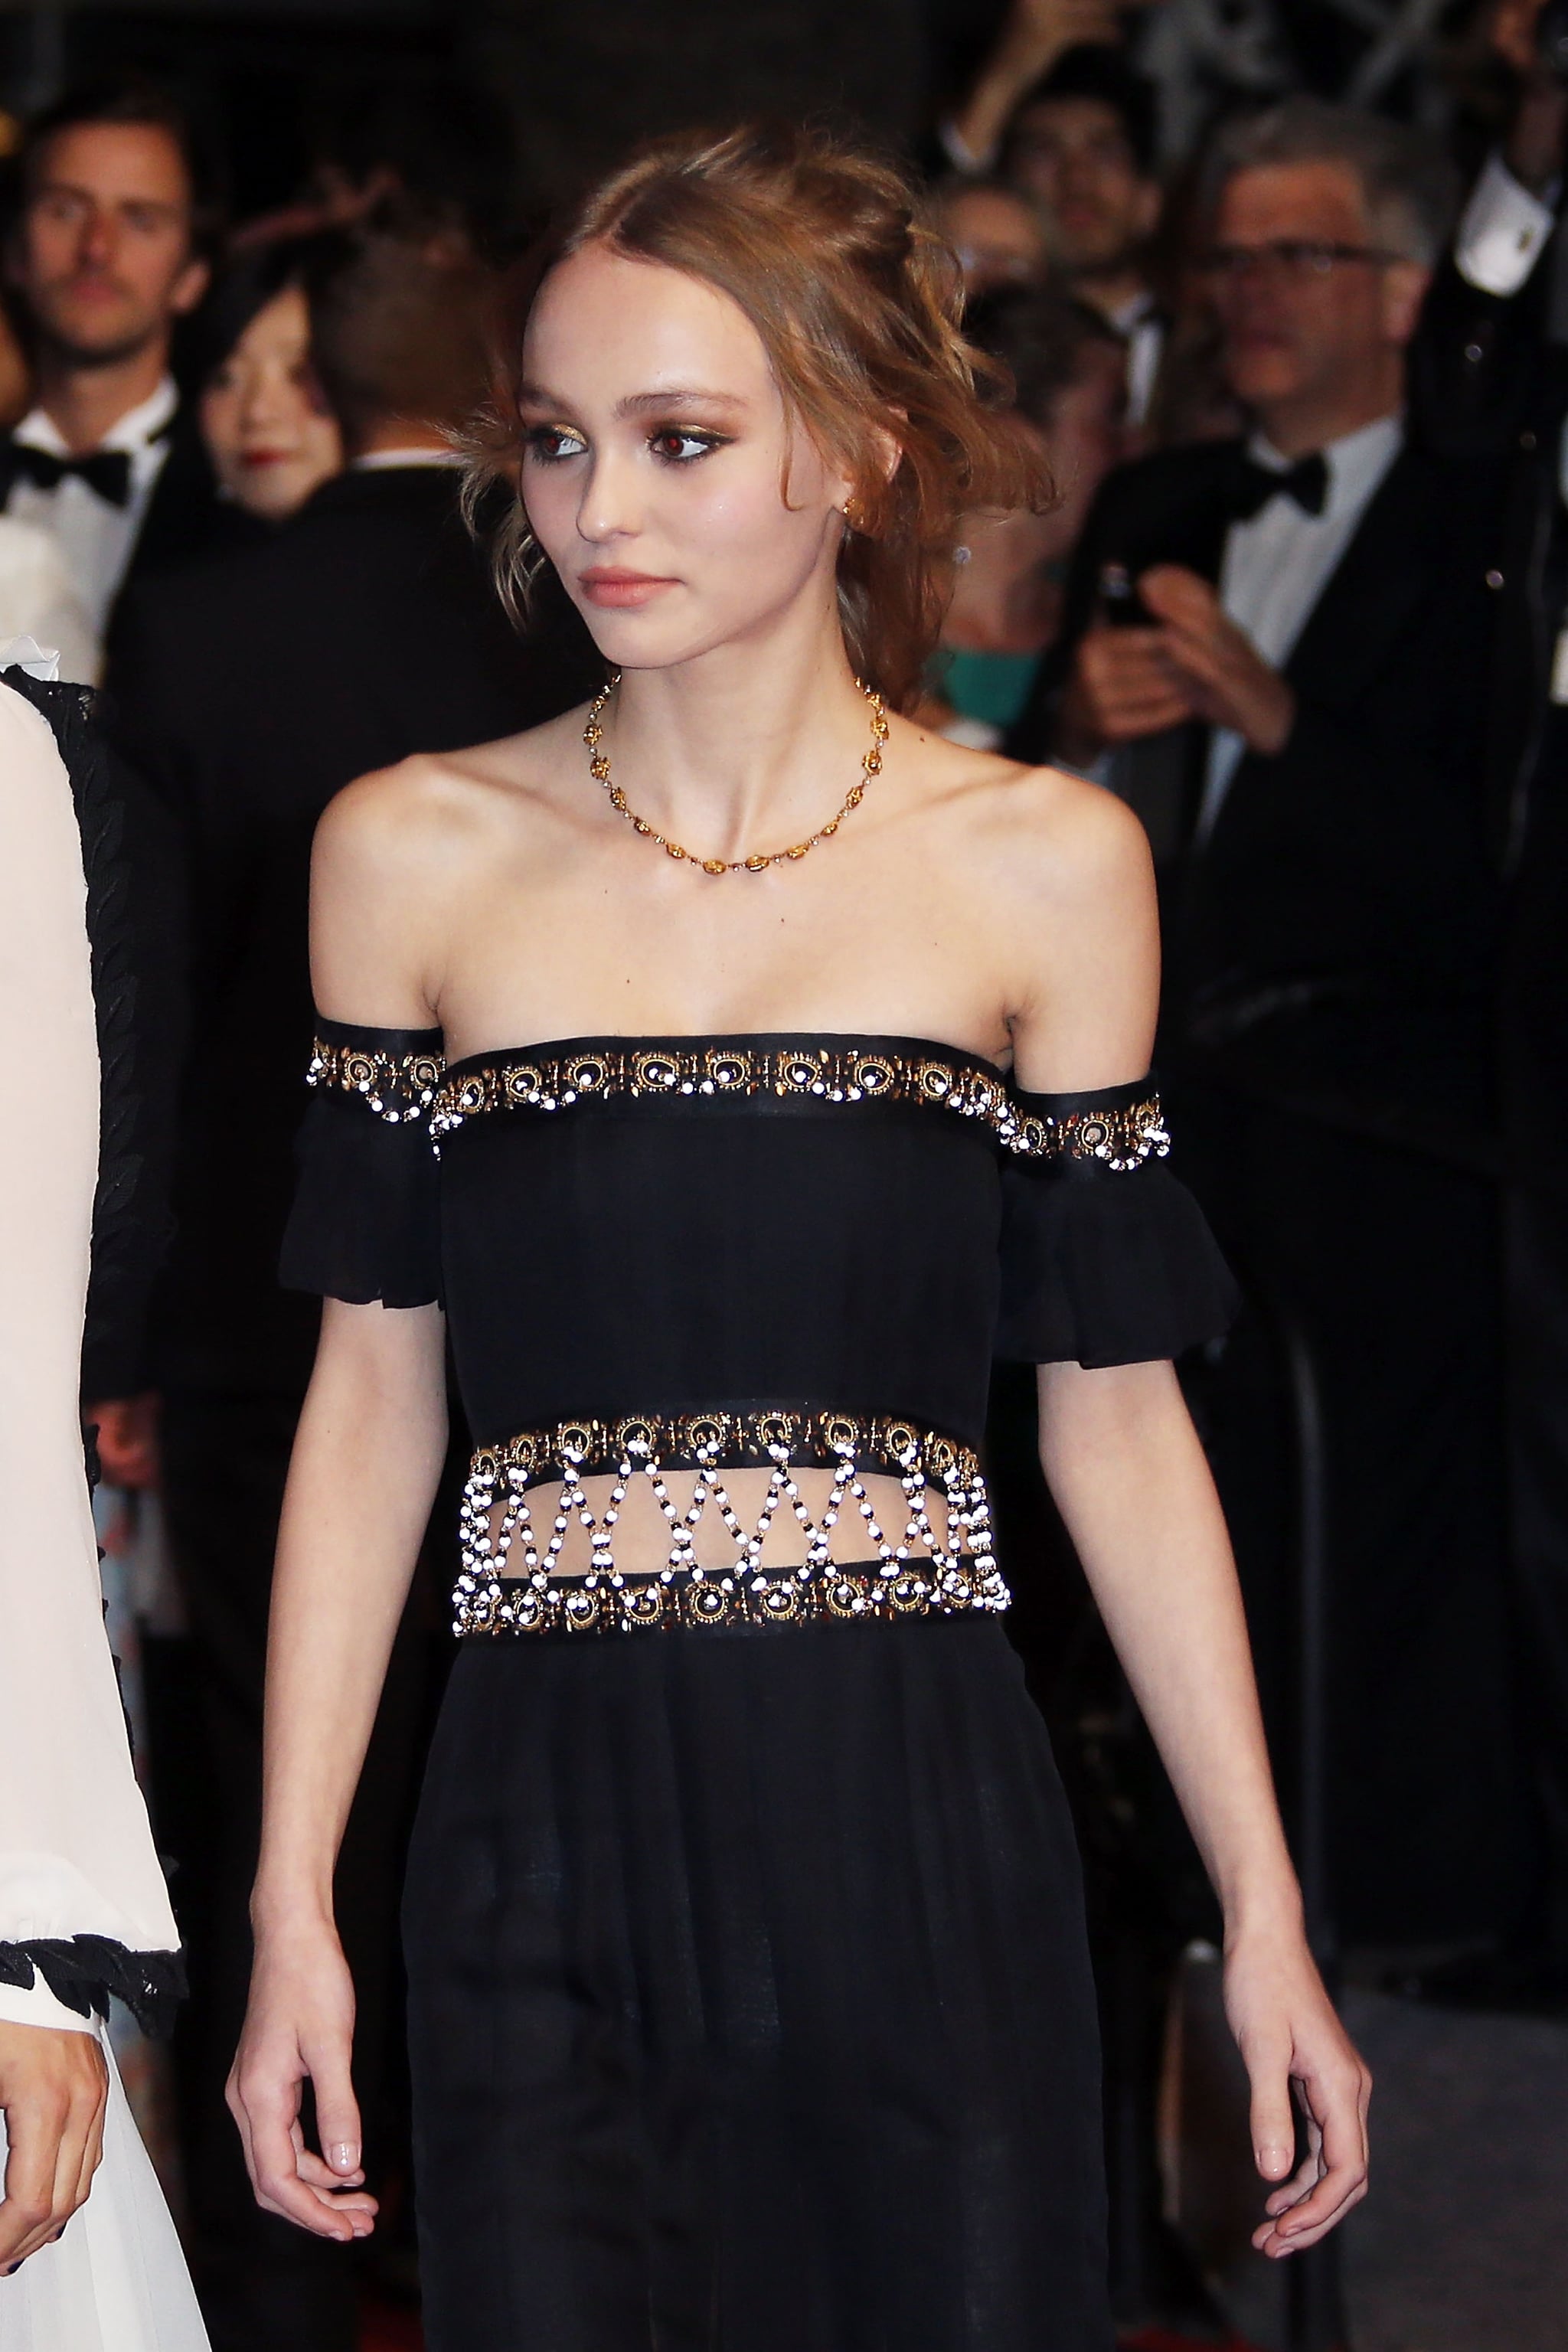 Lily-Rose Depp Just Brought Back One of the Biggest Trends of the 2000s